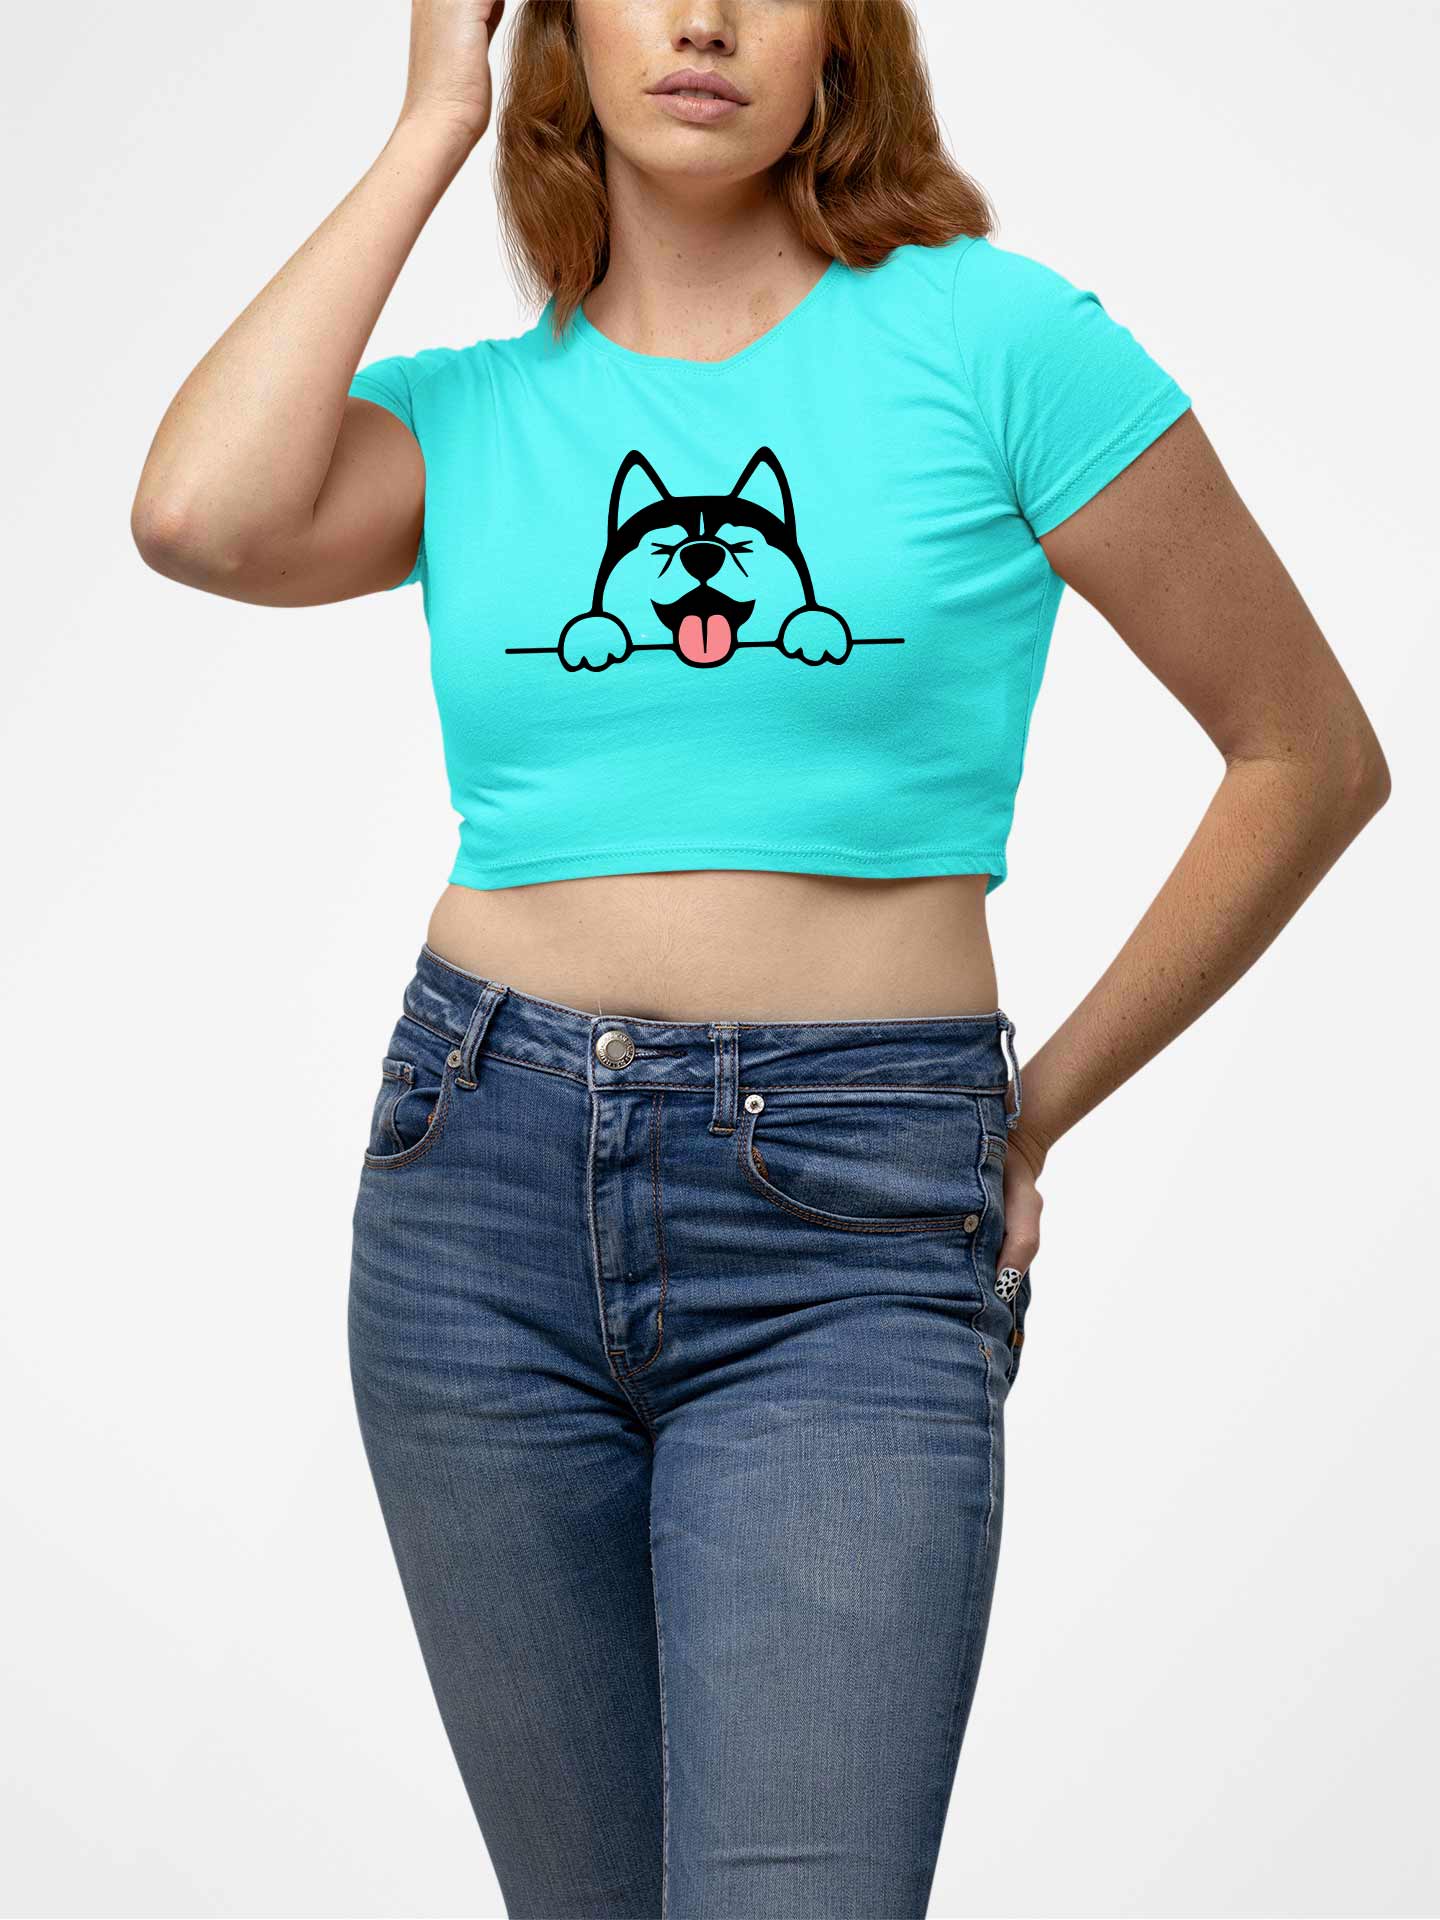 Dogee SkyBlue Round Neck Crop Top